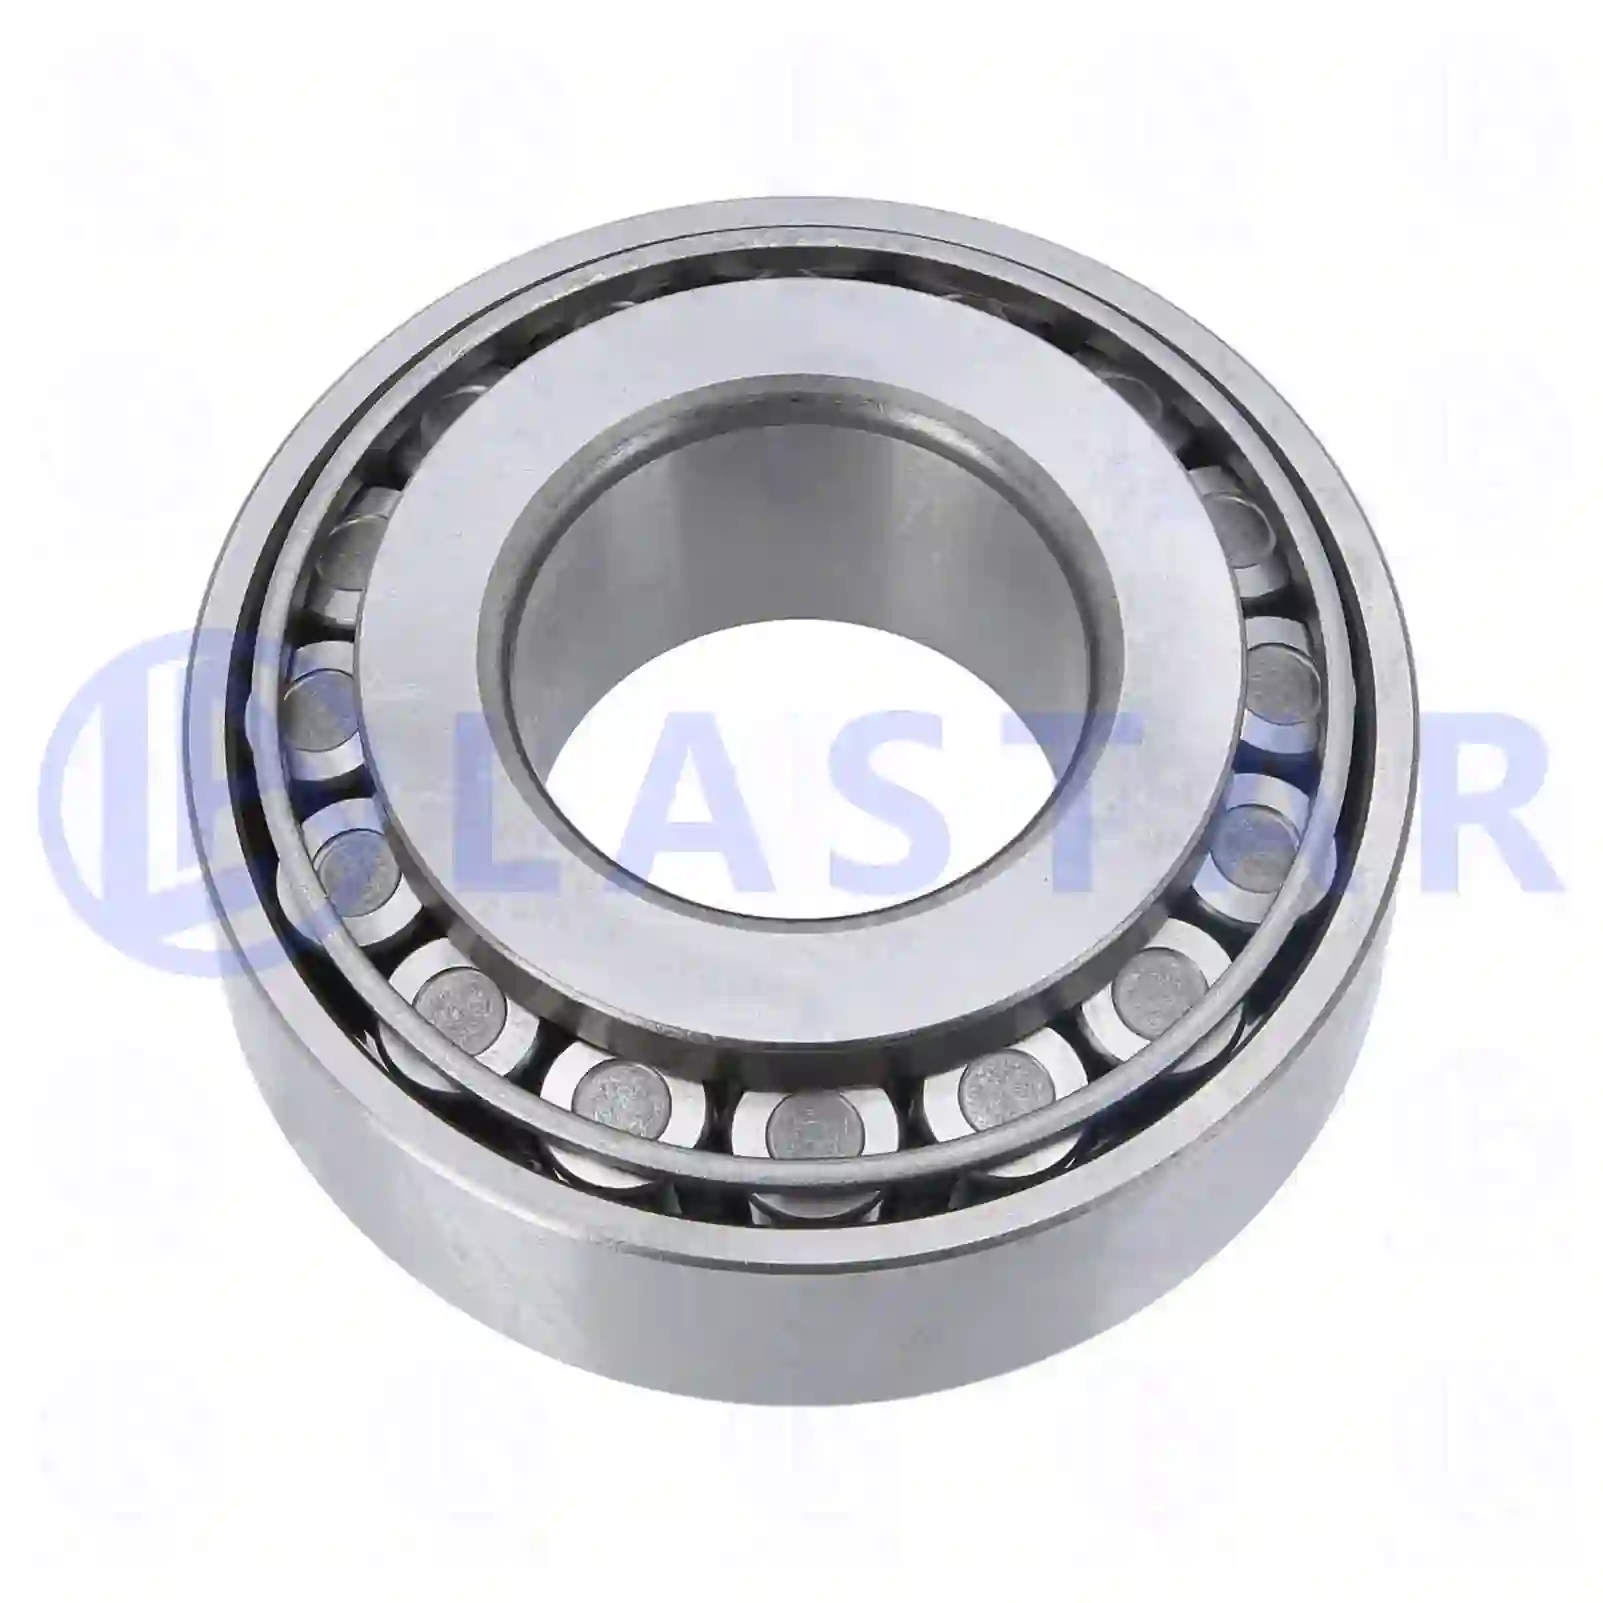 Tapered roller bearing, 77725193, 0275828, 275823, 275828, 01110020, 26800610, 988450103, 988450103A, 988450129, 988450129A, 26800610, 3612965000, 06324990017, 0009812005, 0069810805, 0069816905, 0069817405, 0109819305, 0345386000, 38326-90000, 0023432311, 0959532310, 0959532311, 5000022267, 4200003200, 14764, 178427, 179427, 11095, 183338, ZG02973-0008 ||  77725193 Lastar Spare Part | Truck Spare Parts, Auotomotive Spare Parts Tapered roller bearing, 77725193, 0275828, 275823, 275828, 01110020, 26800610, 988450103, 988450103A, 988450129, 988450129A, 26800610, 3612965000, 06324990017, 0009812005, 0069810805, 0069816905, 0069817405, 0109819305, 0345386000, 38326-90000, 0023432311, 0959532310, 0959532311, 5000022267, 4200003200, 14764, 178427, 179427, 11095, 183338, ZG02973-0008 ||  77725193 Lastar Spare Part | Truck Spare Parts, Auotomotive Spare Parts